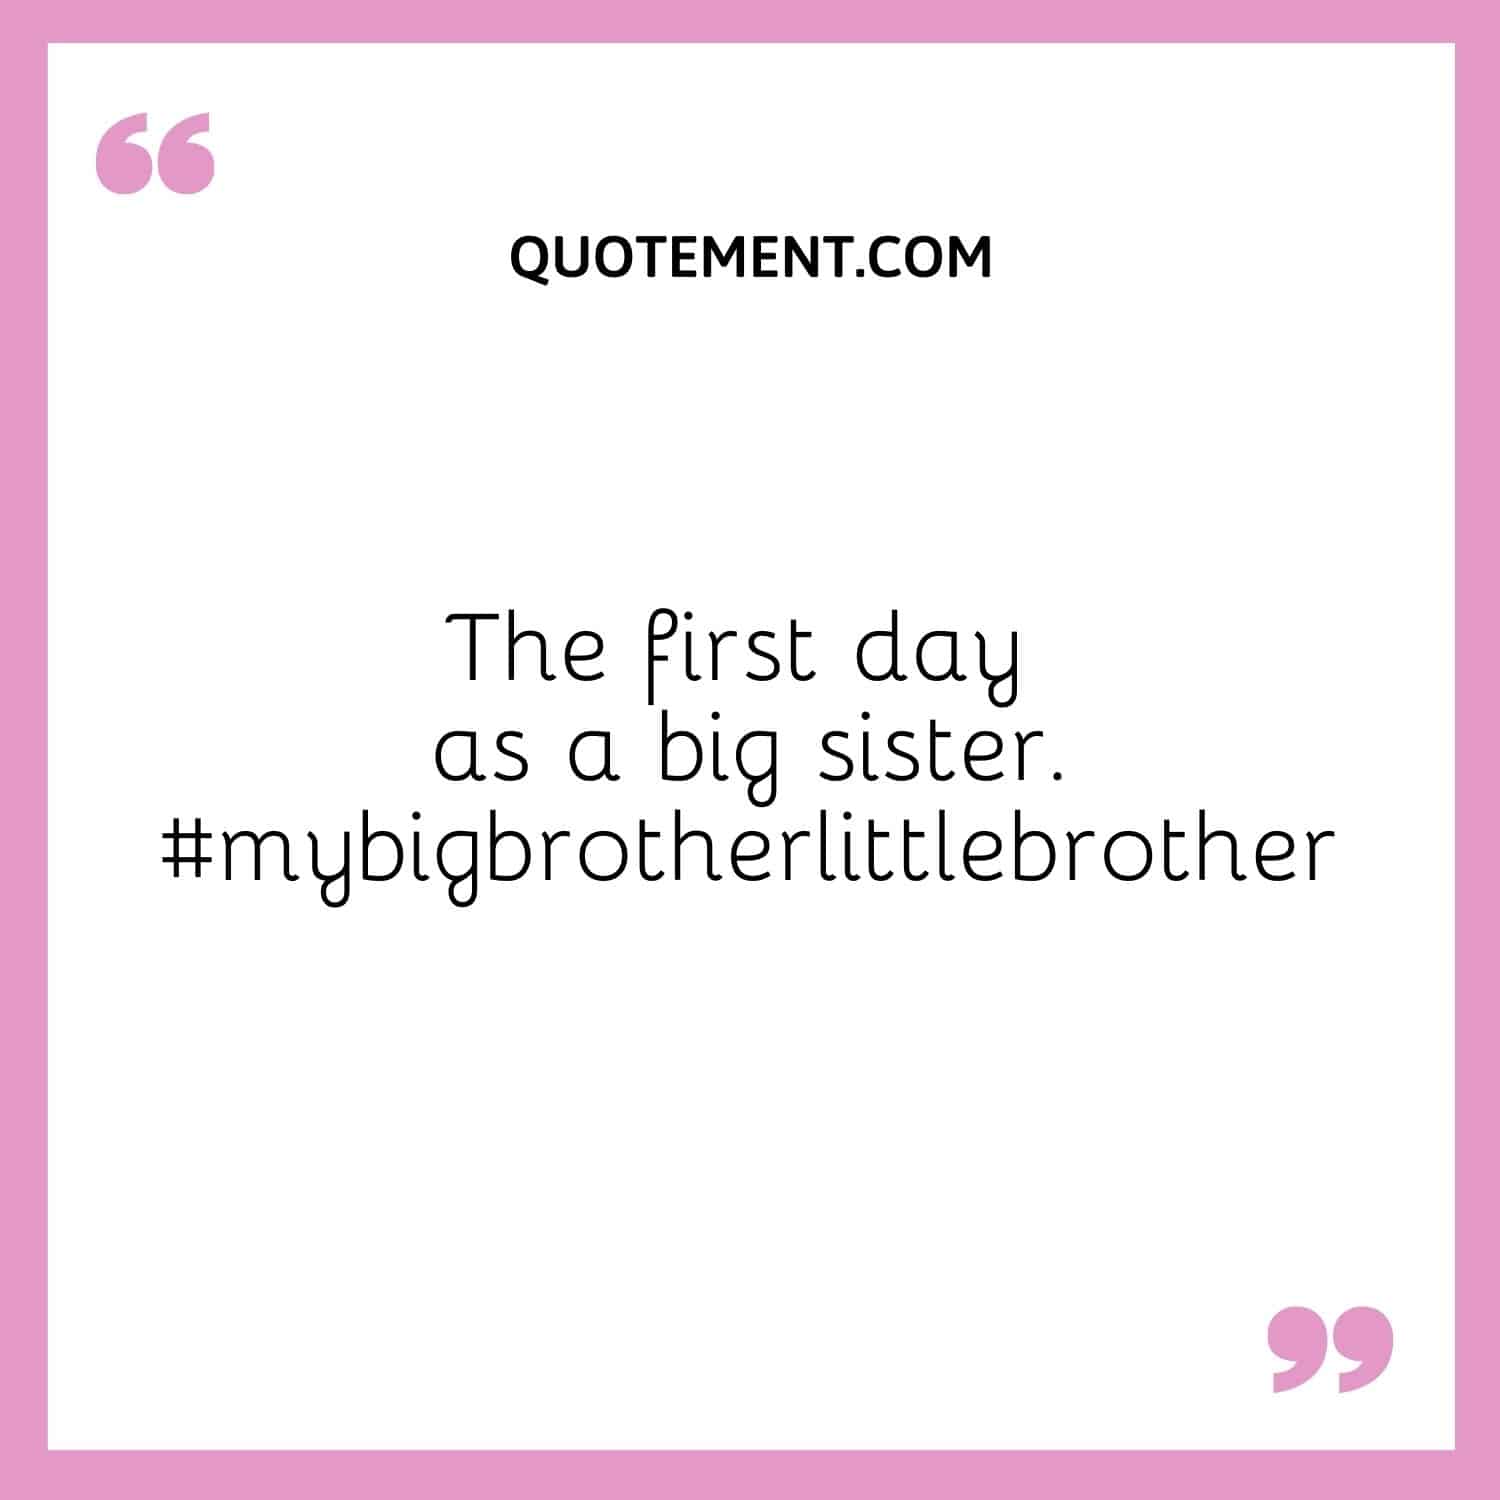 The first day as a big sister.